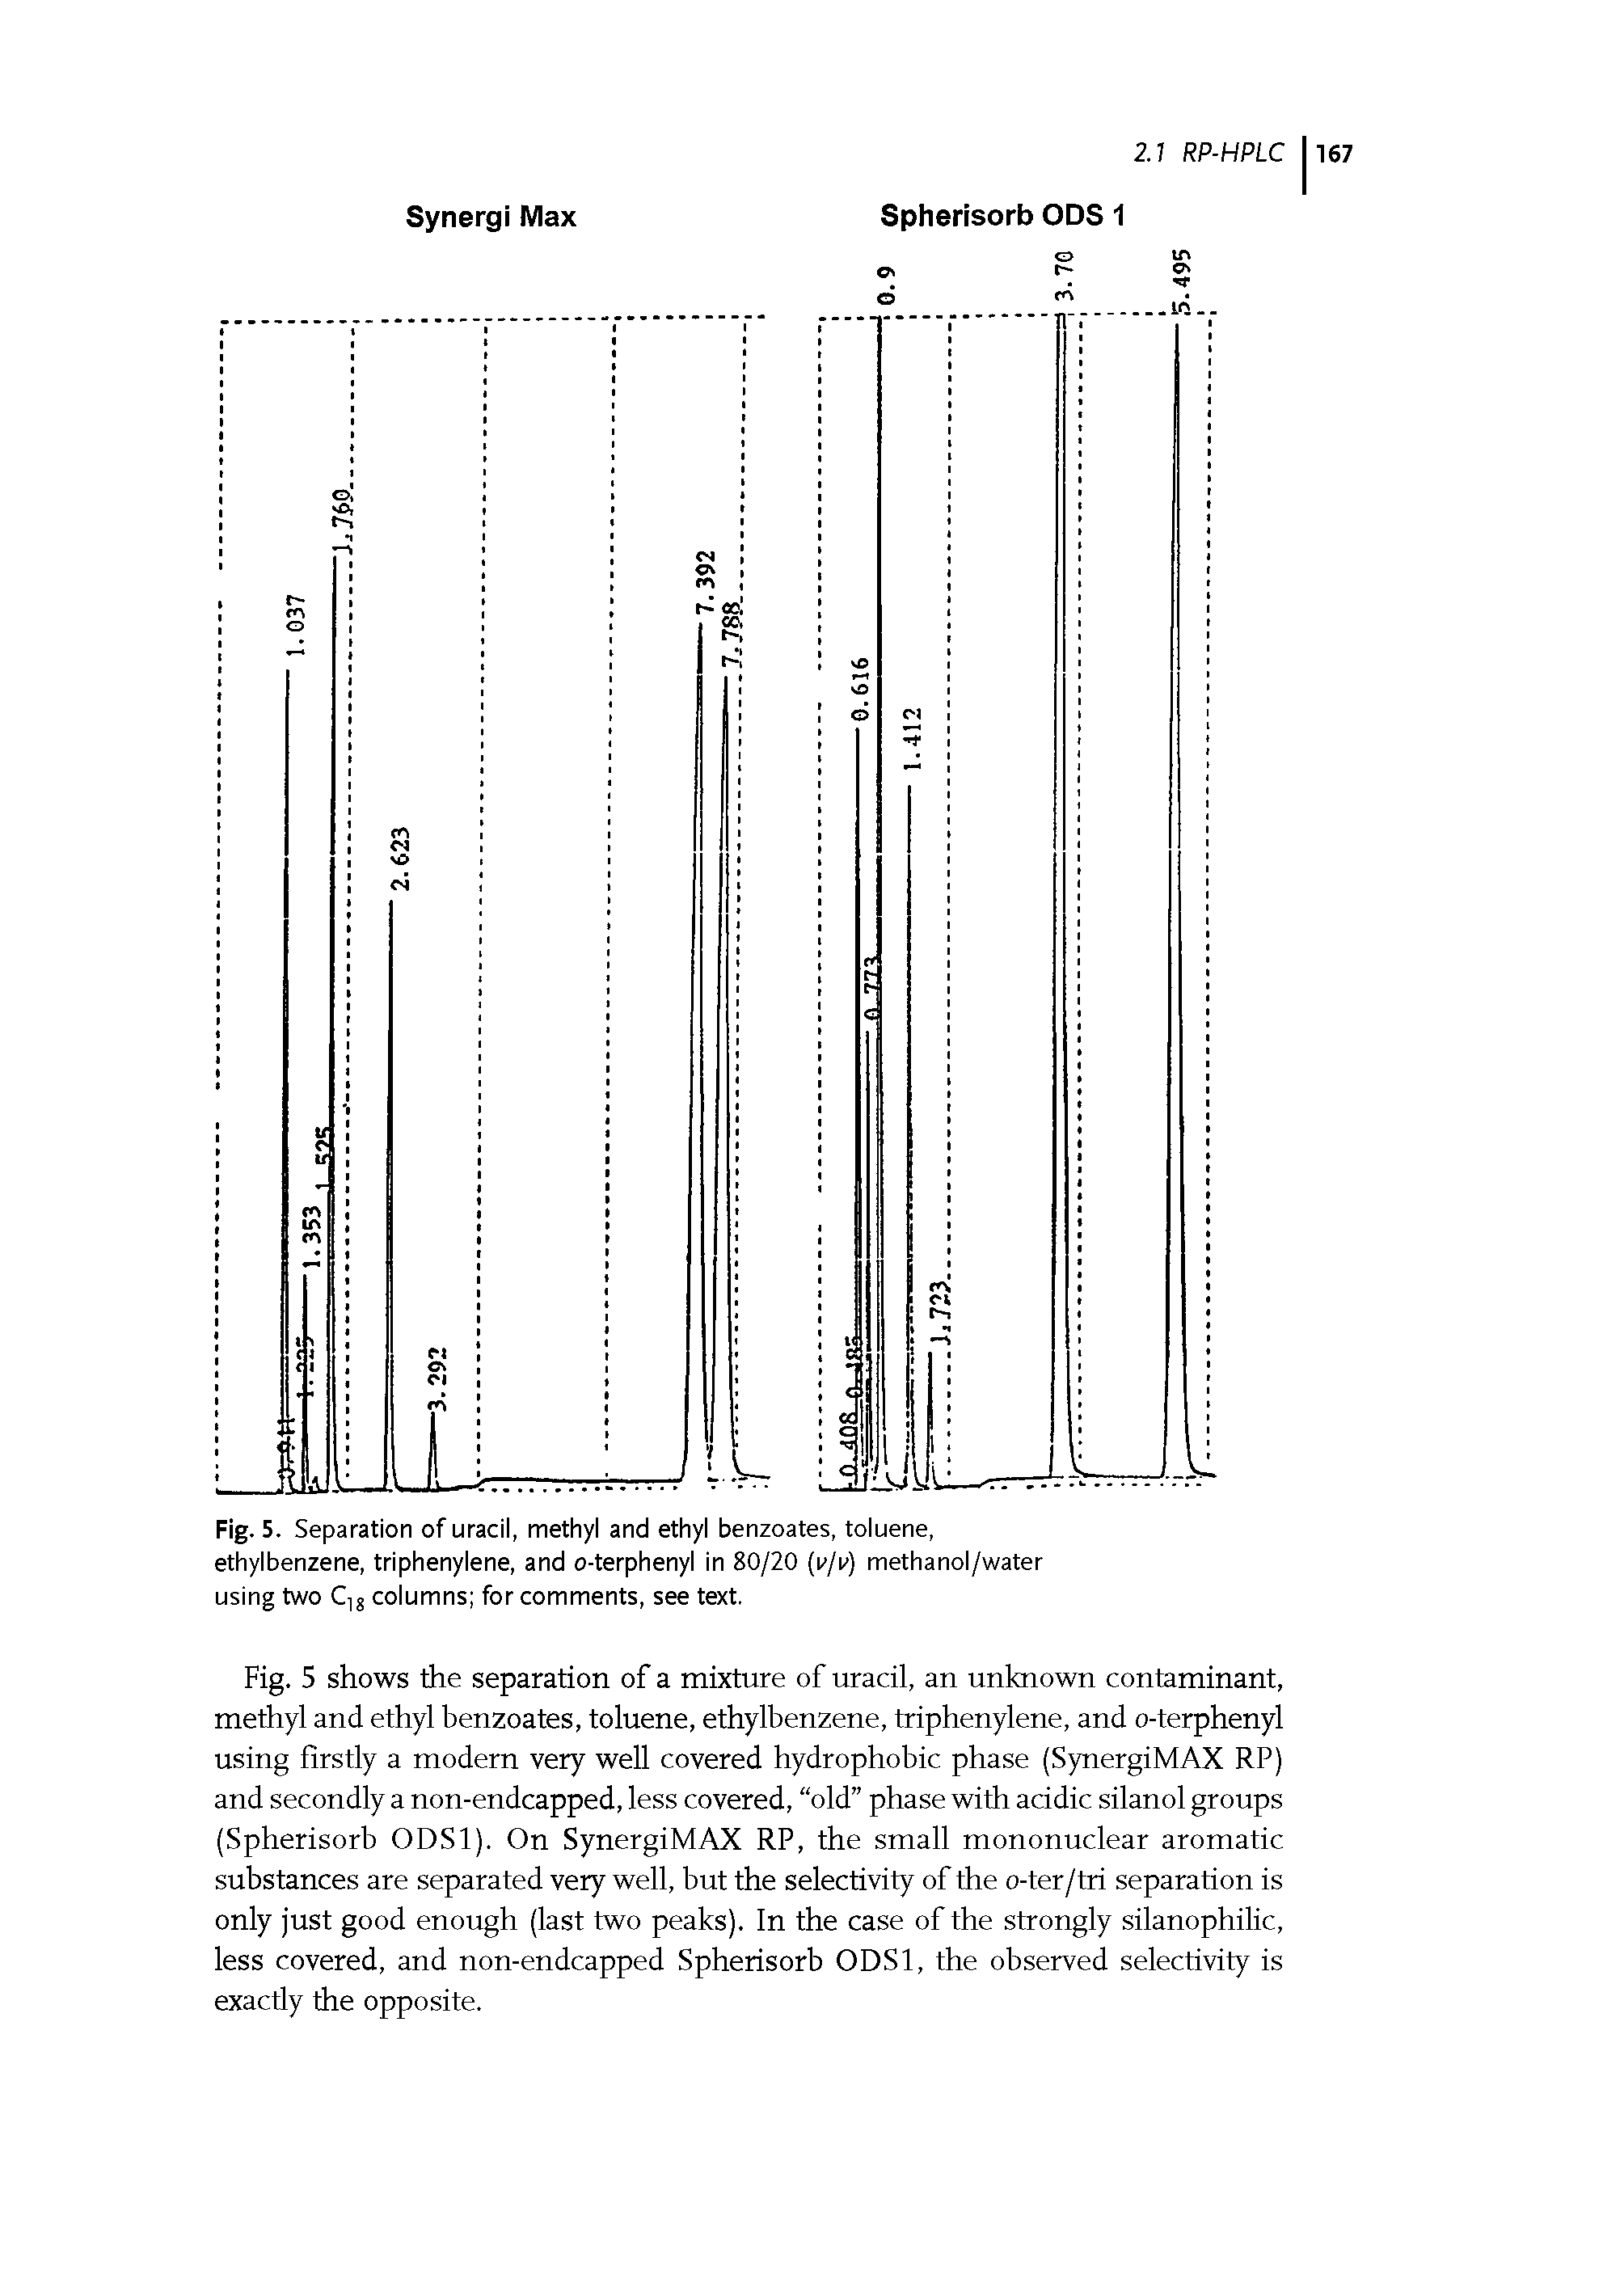 Fig. 5. Separation of uracil, methyl and ethyl benzoates, toluene, ethylbenzene, triphenylene, and o-terphenyl in 80/20 (I /i ) methanol/water using two Cij columns for comments, see text.